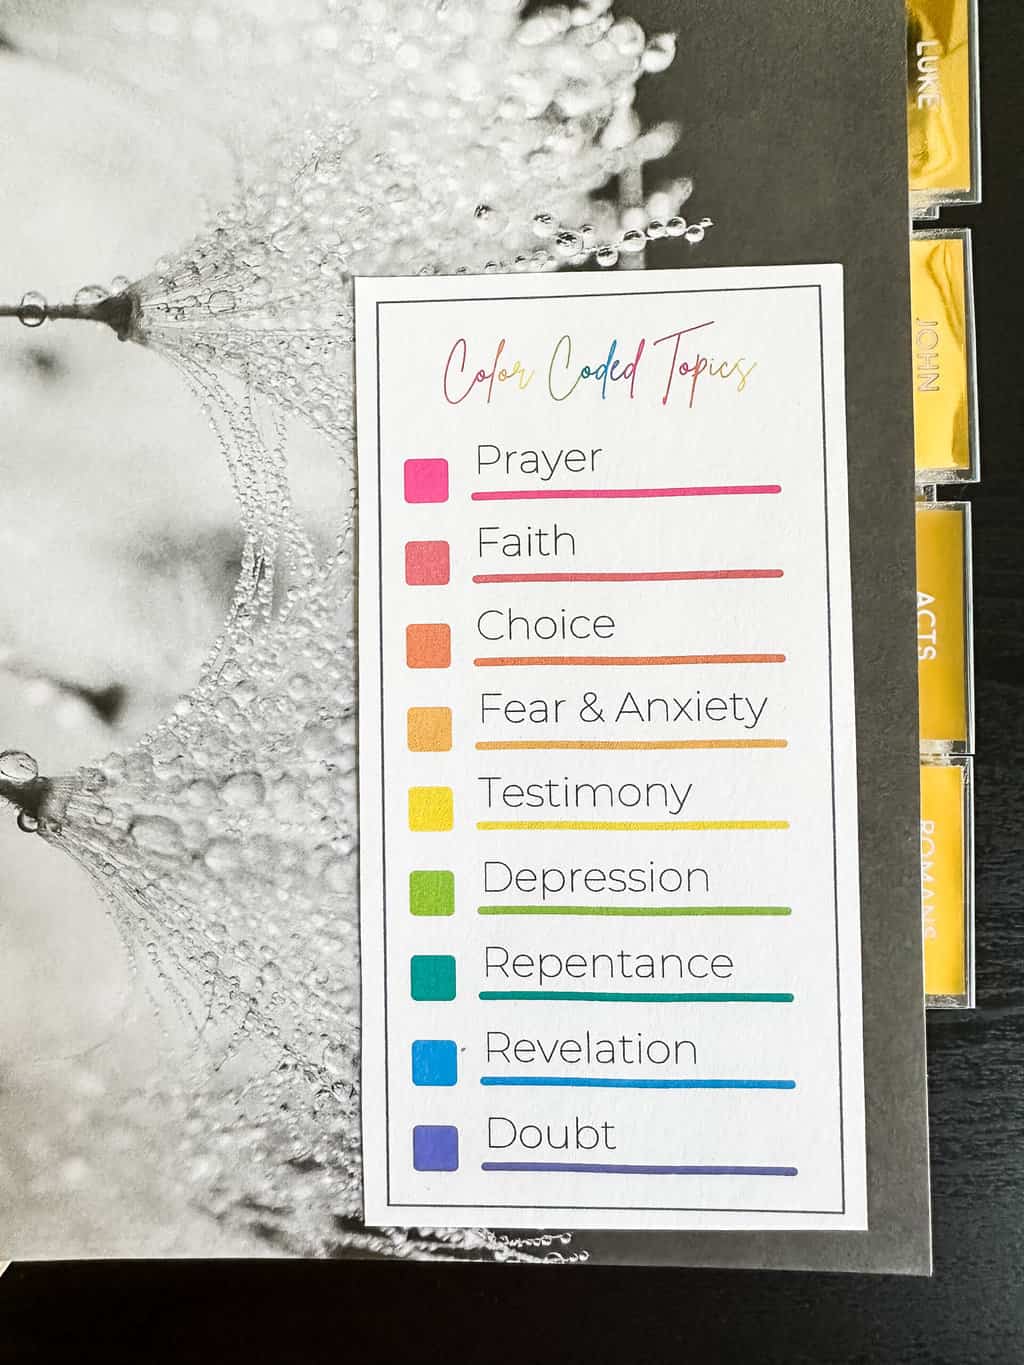 Bible Journaling Ideas to Bring More Meaning to Your Scripture Reading